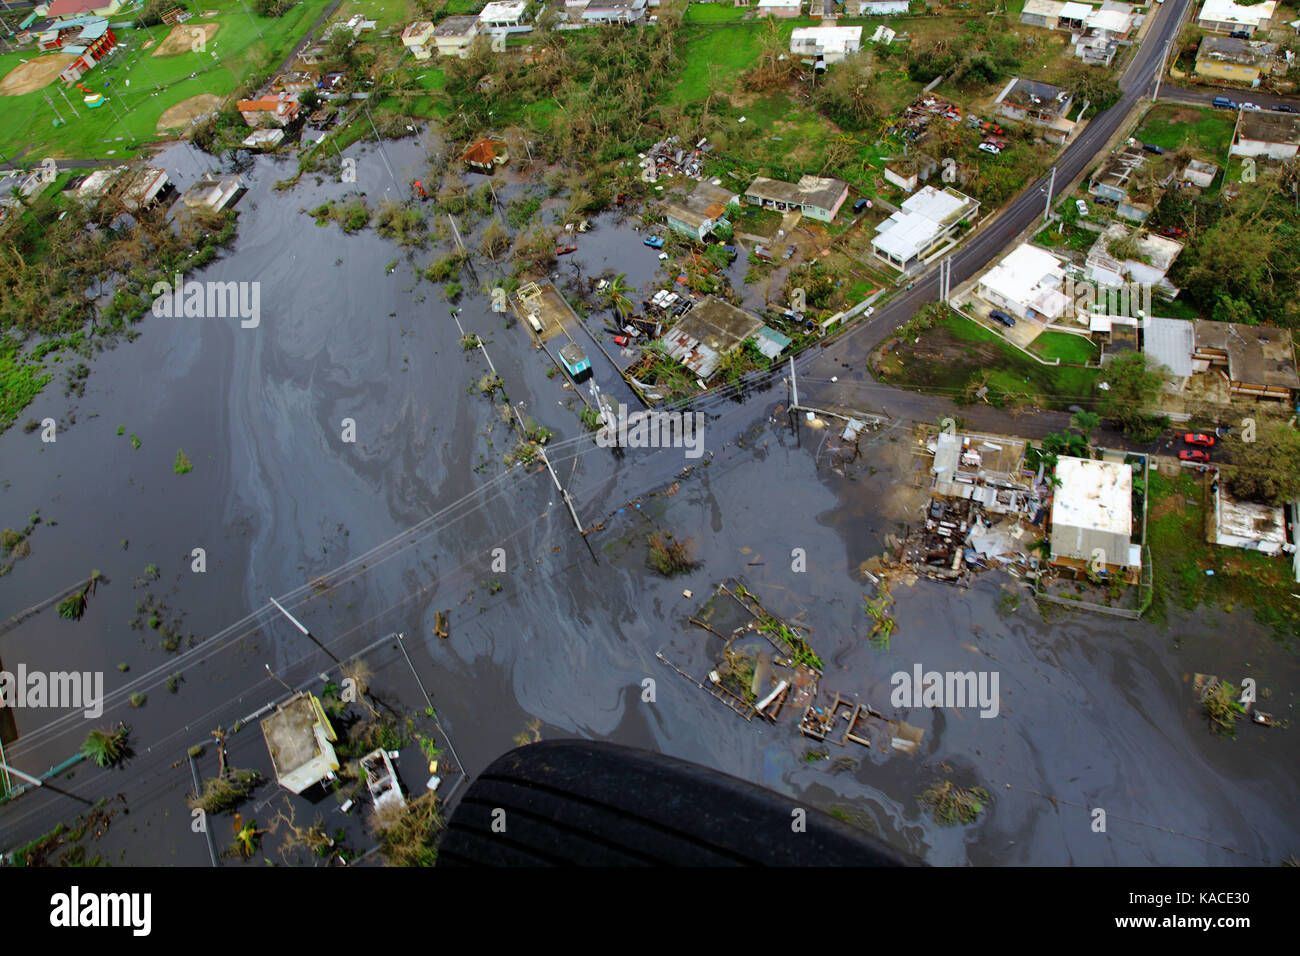 Damage caused by Hurricane Maria in Puerto Rico Stock Photo